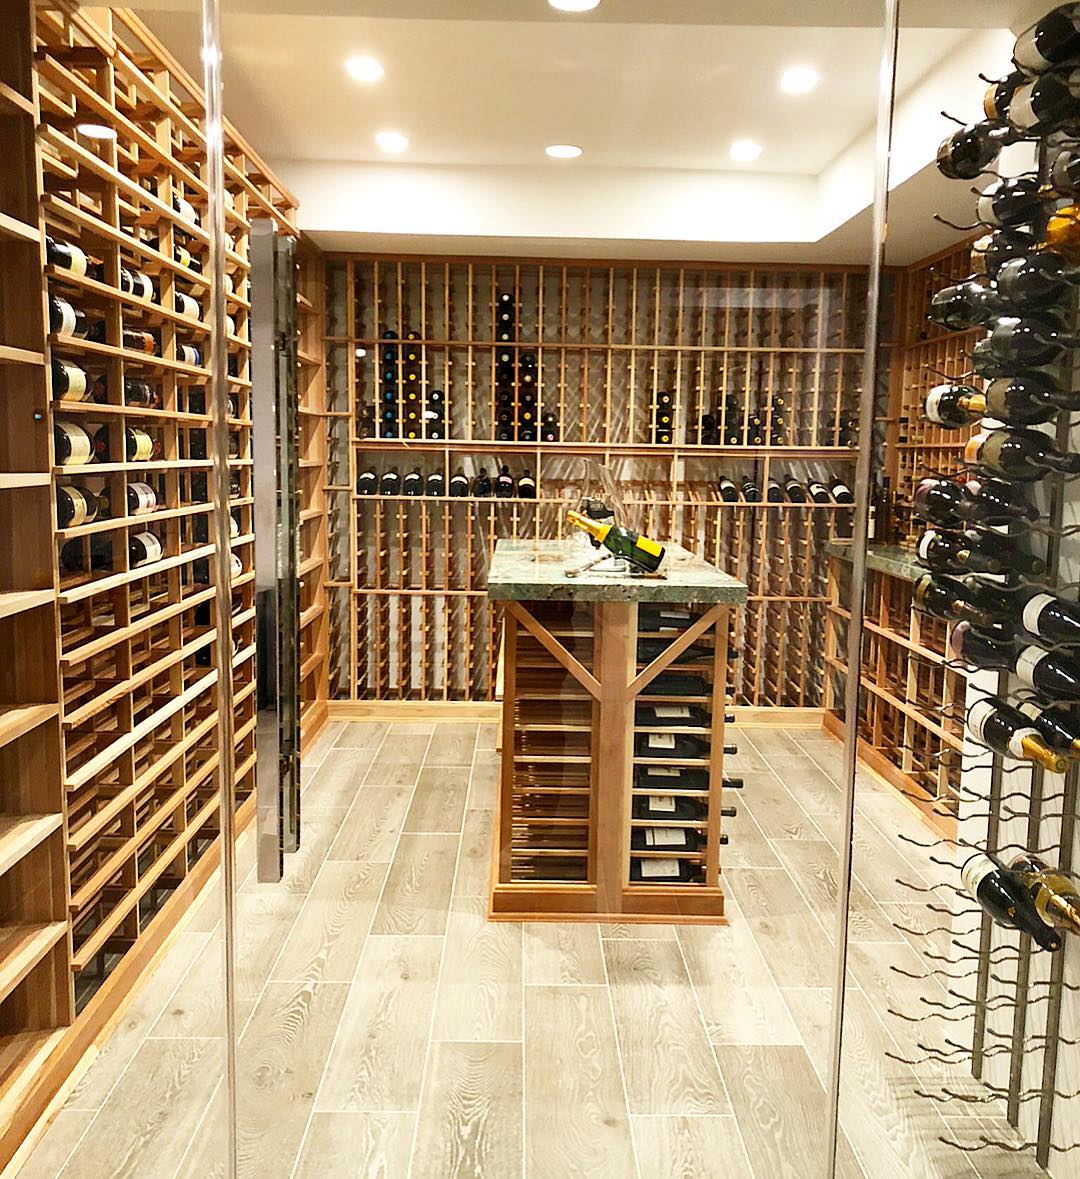 in the meantime Shipwreck Happy 21 Home Wine Room Design & Organization Ideas | Extra Space Storage